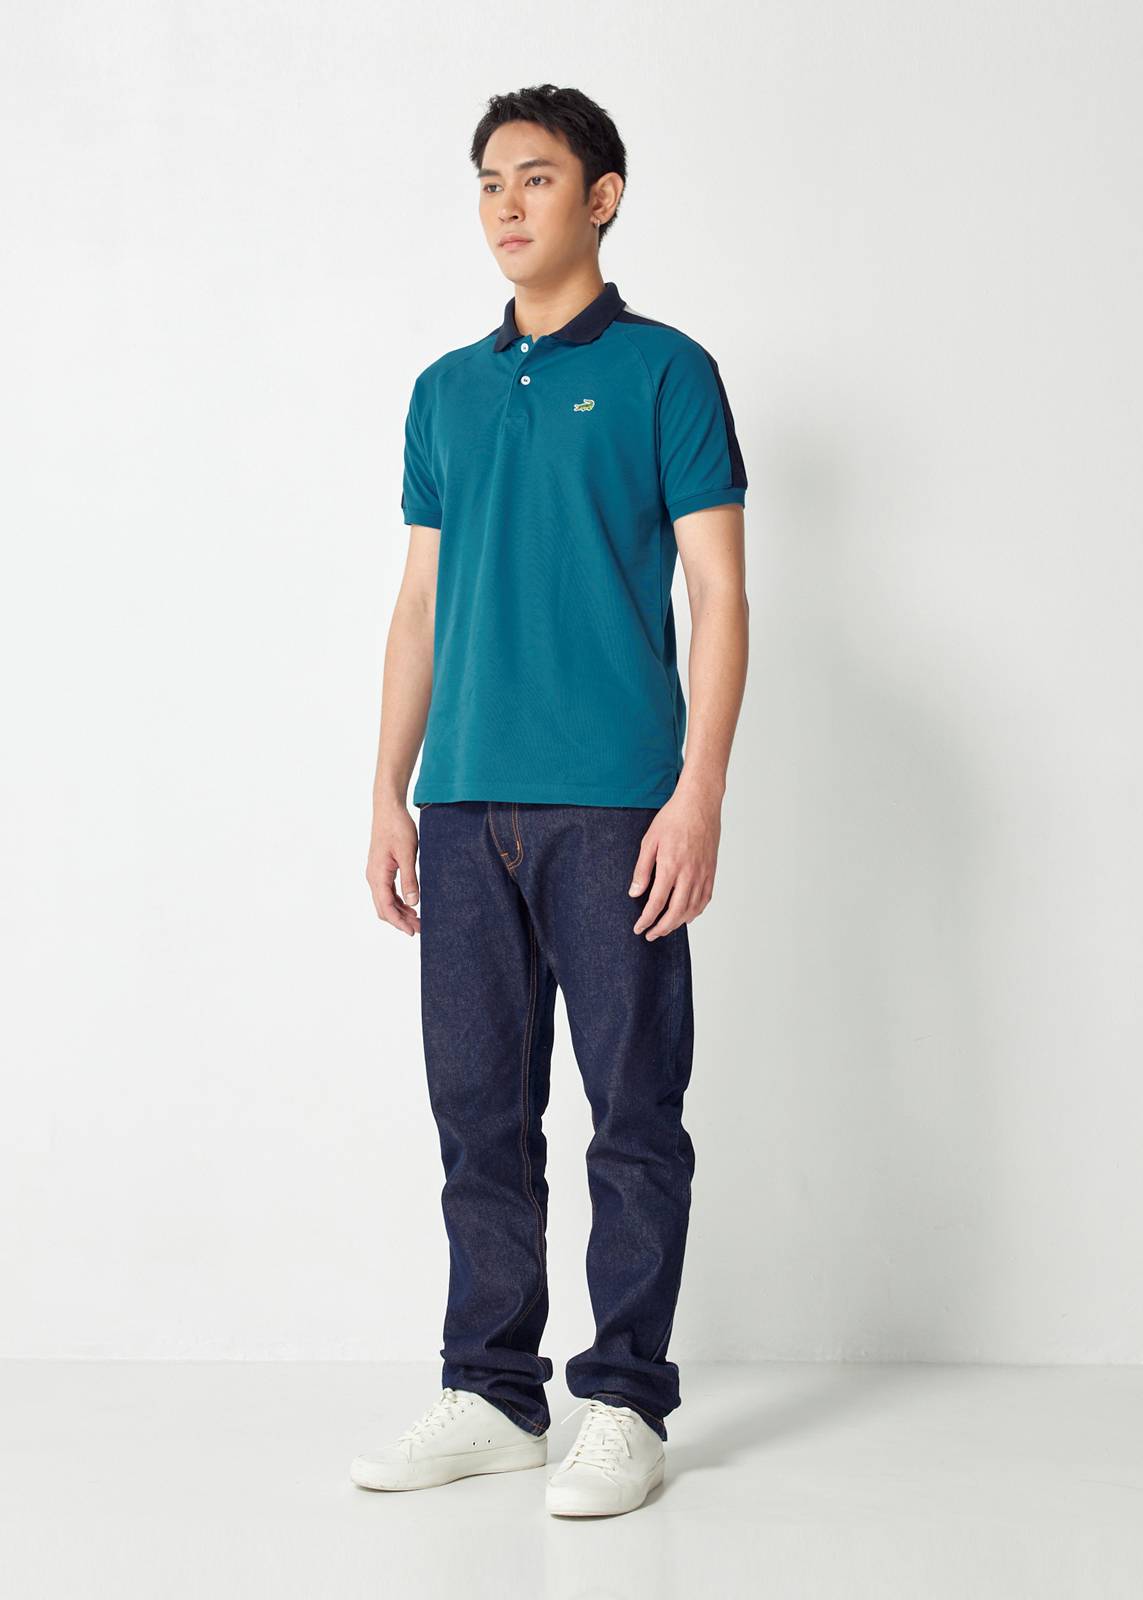 MARINE TEAL GREEN CUSTOM FIT WITH COLOUR BLOCK POLO SHIRT